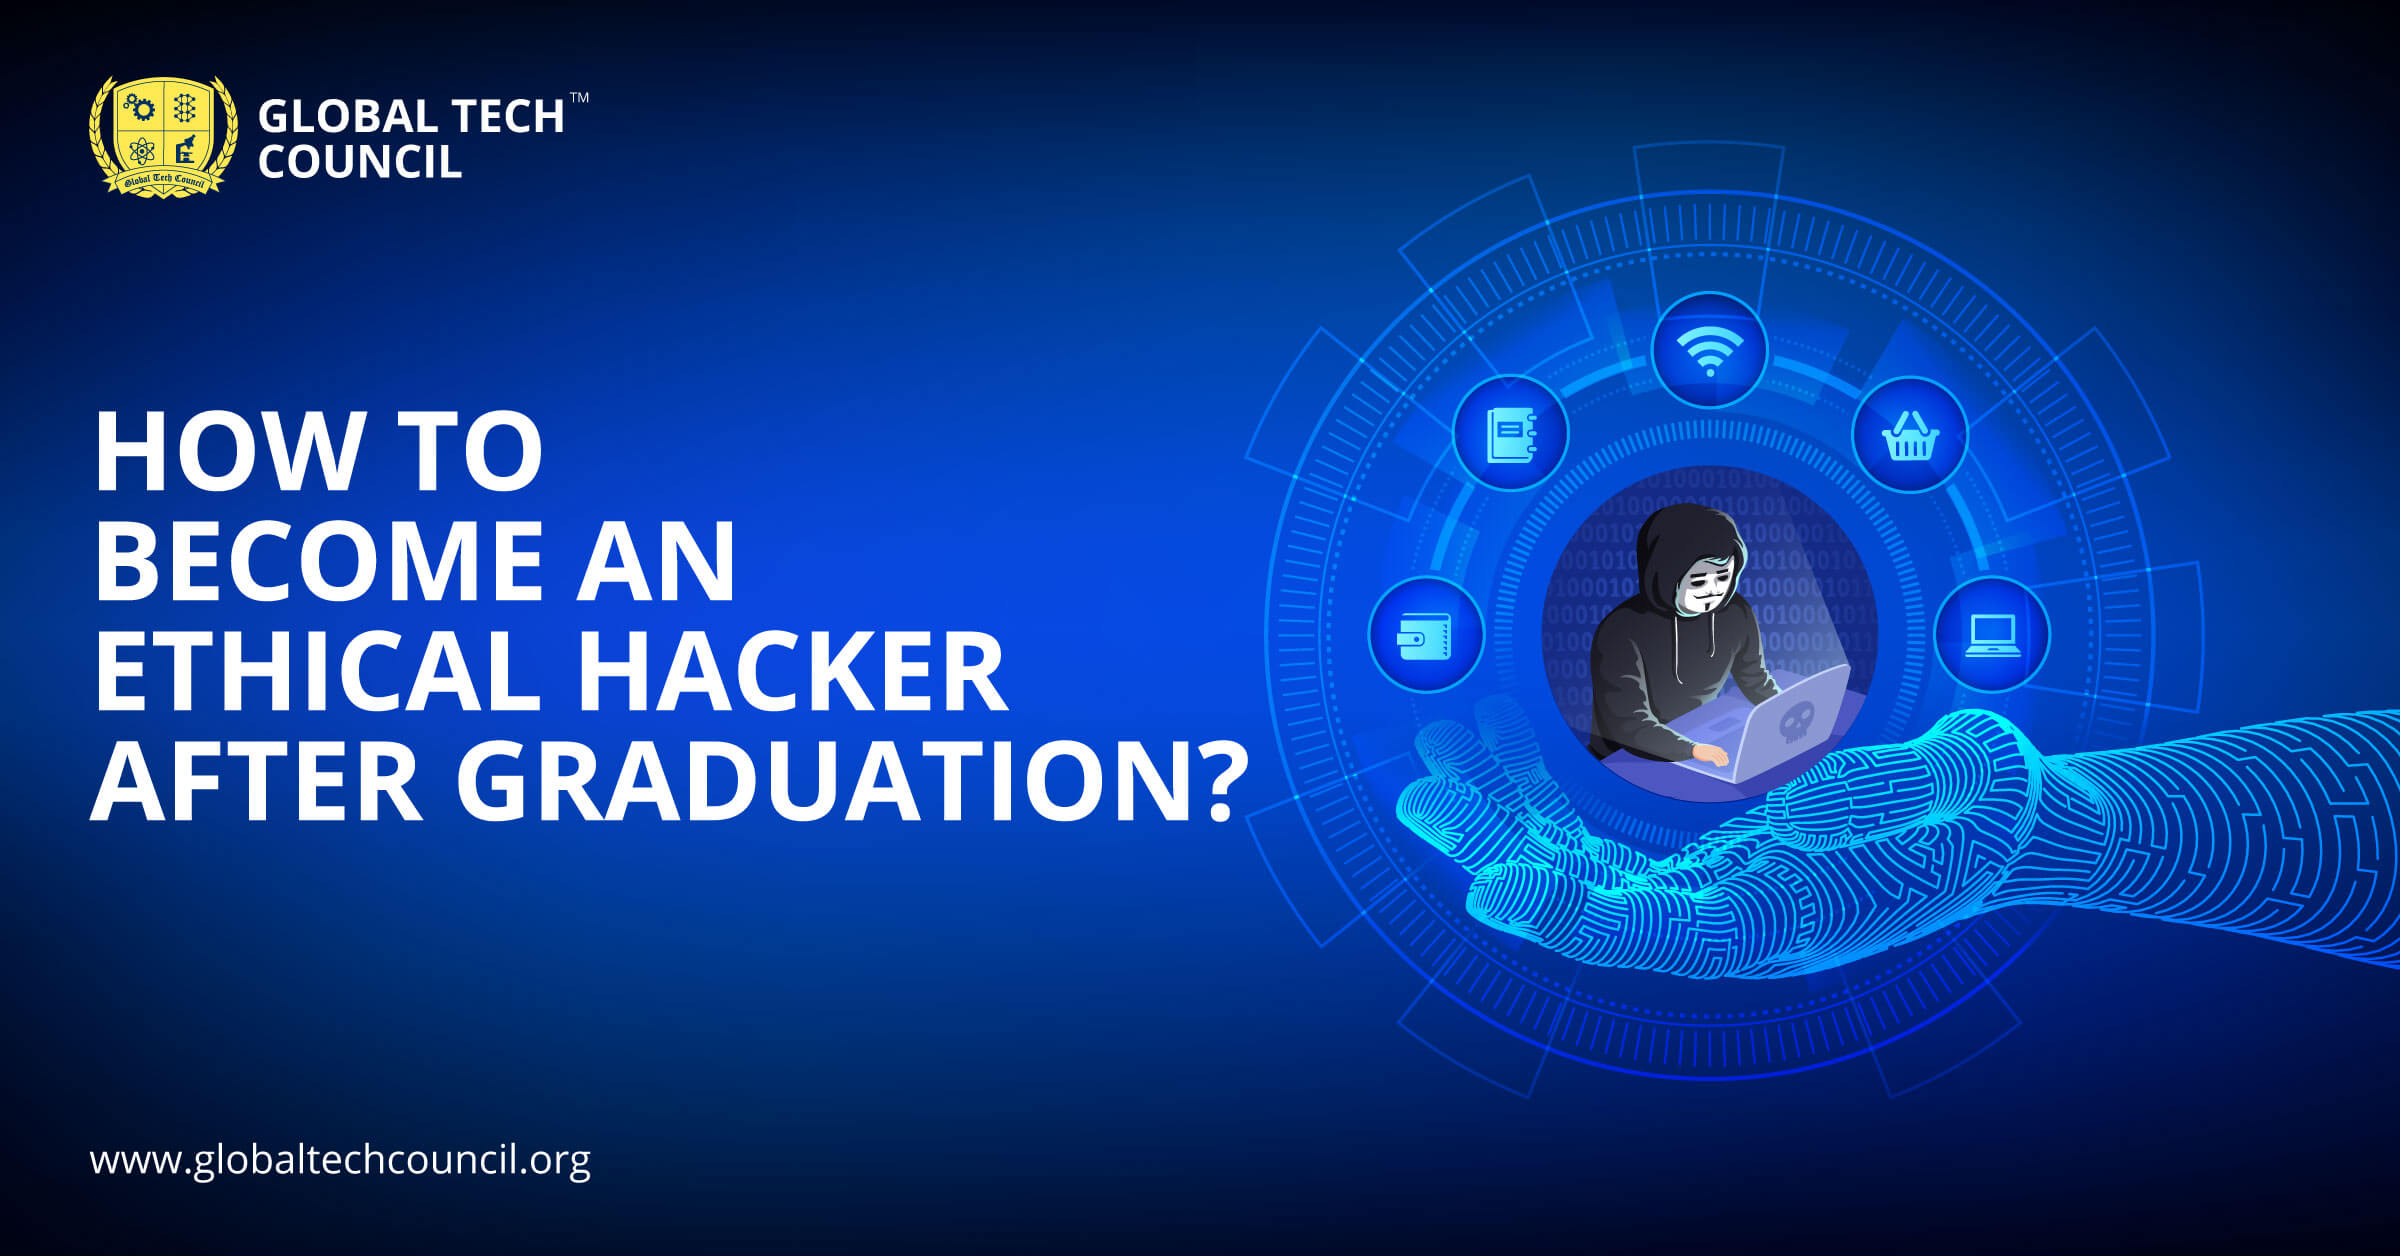 How to Become an Ethical Hacker After Graduation